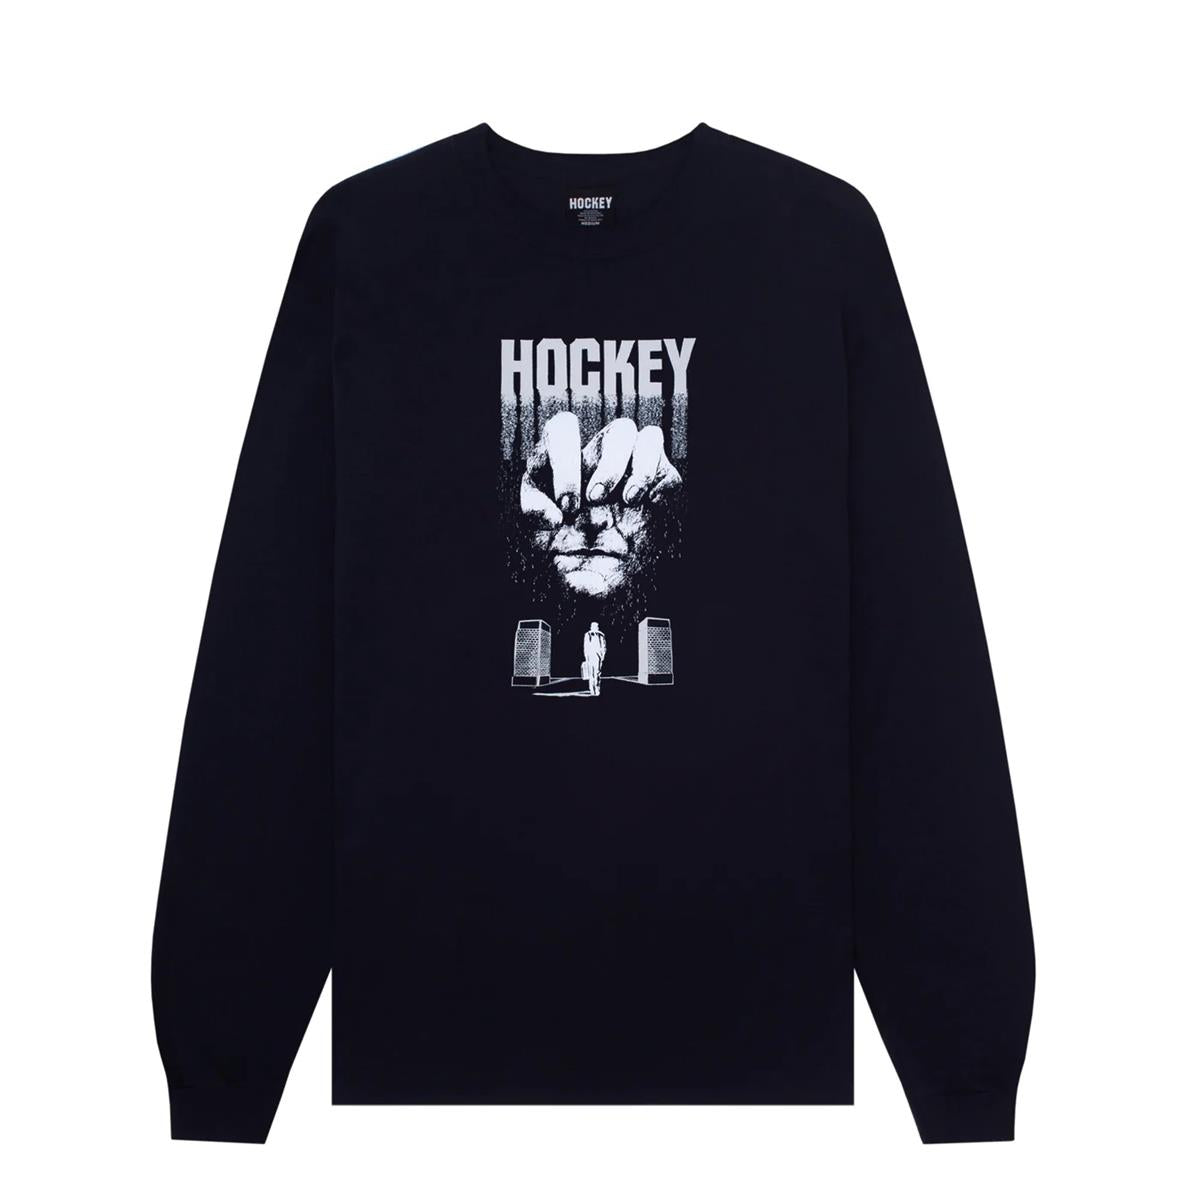 Hockey Skateboards Exit Overlord L/S Tee Black